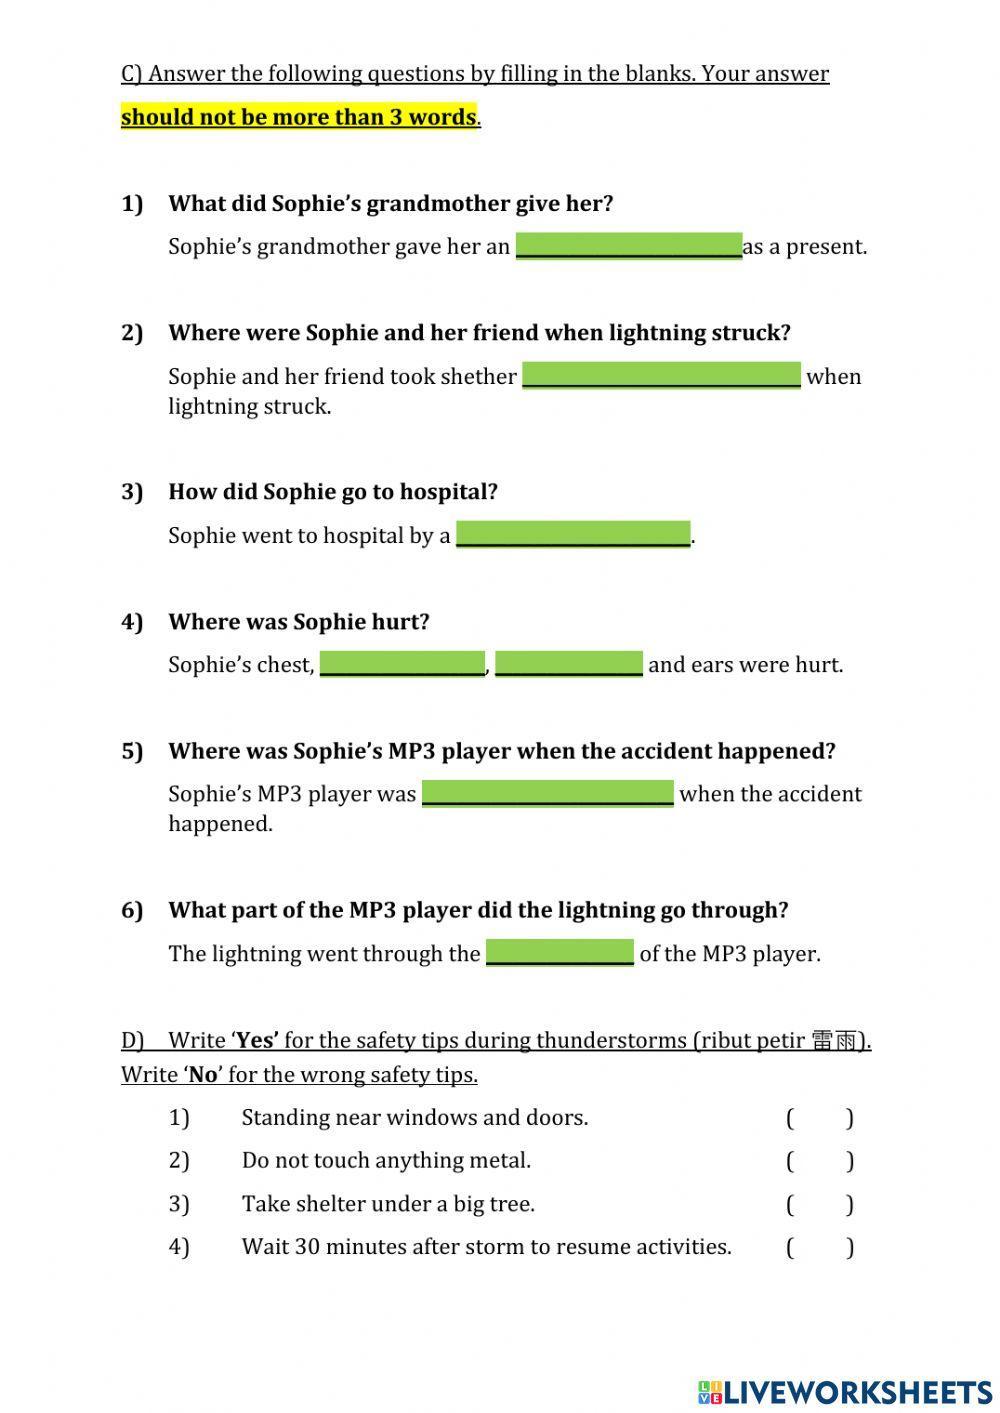 Saved By An MP3 Player interactive worksheet | Live Worksheets